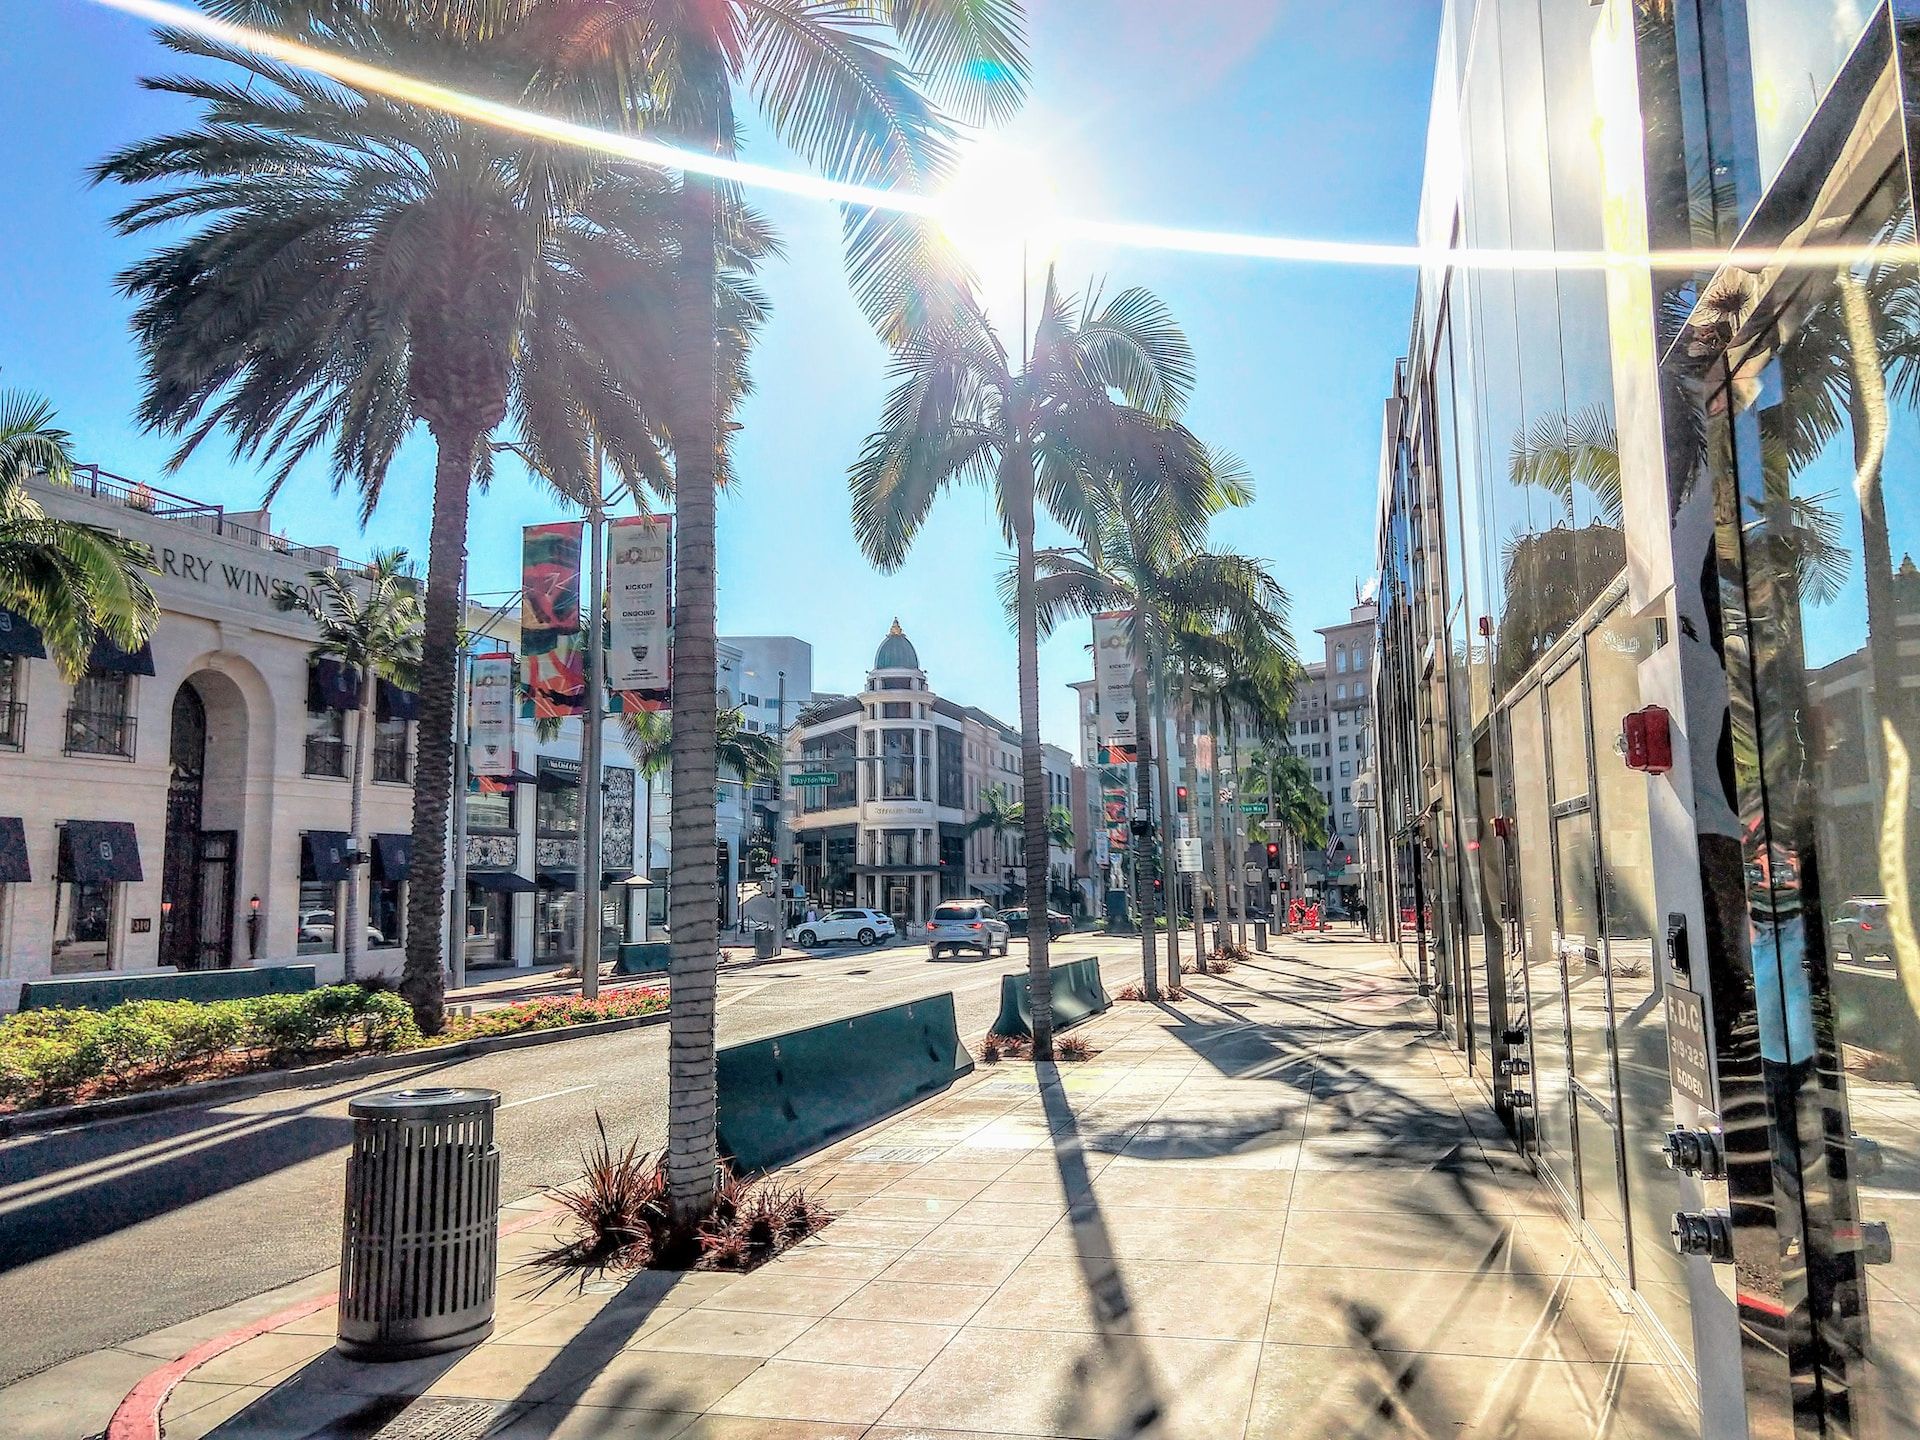 Rodeo Drive in Beverly Hills, Los Angeles California